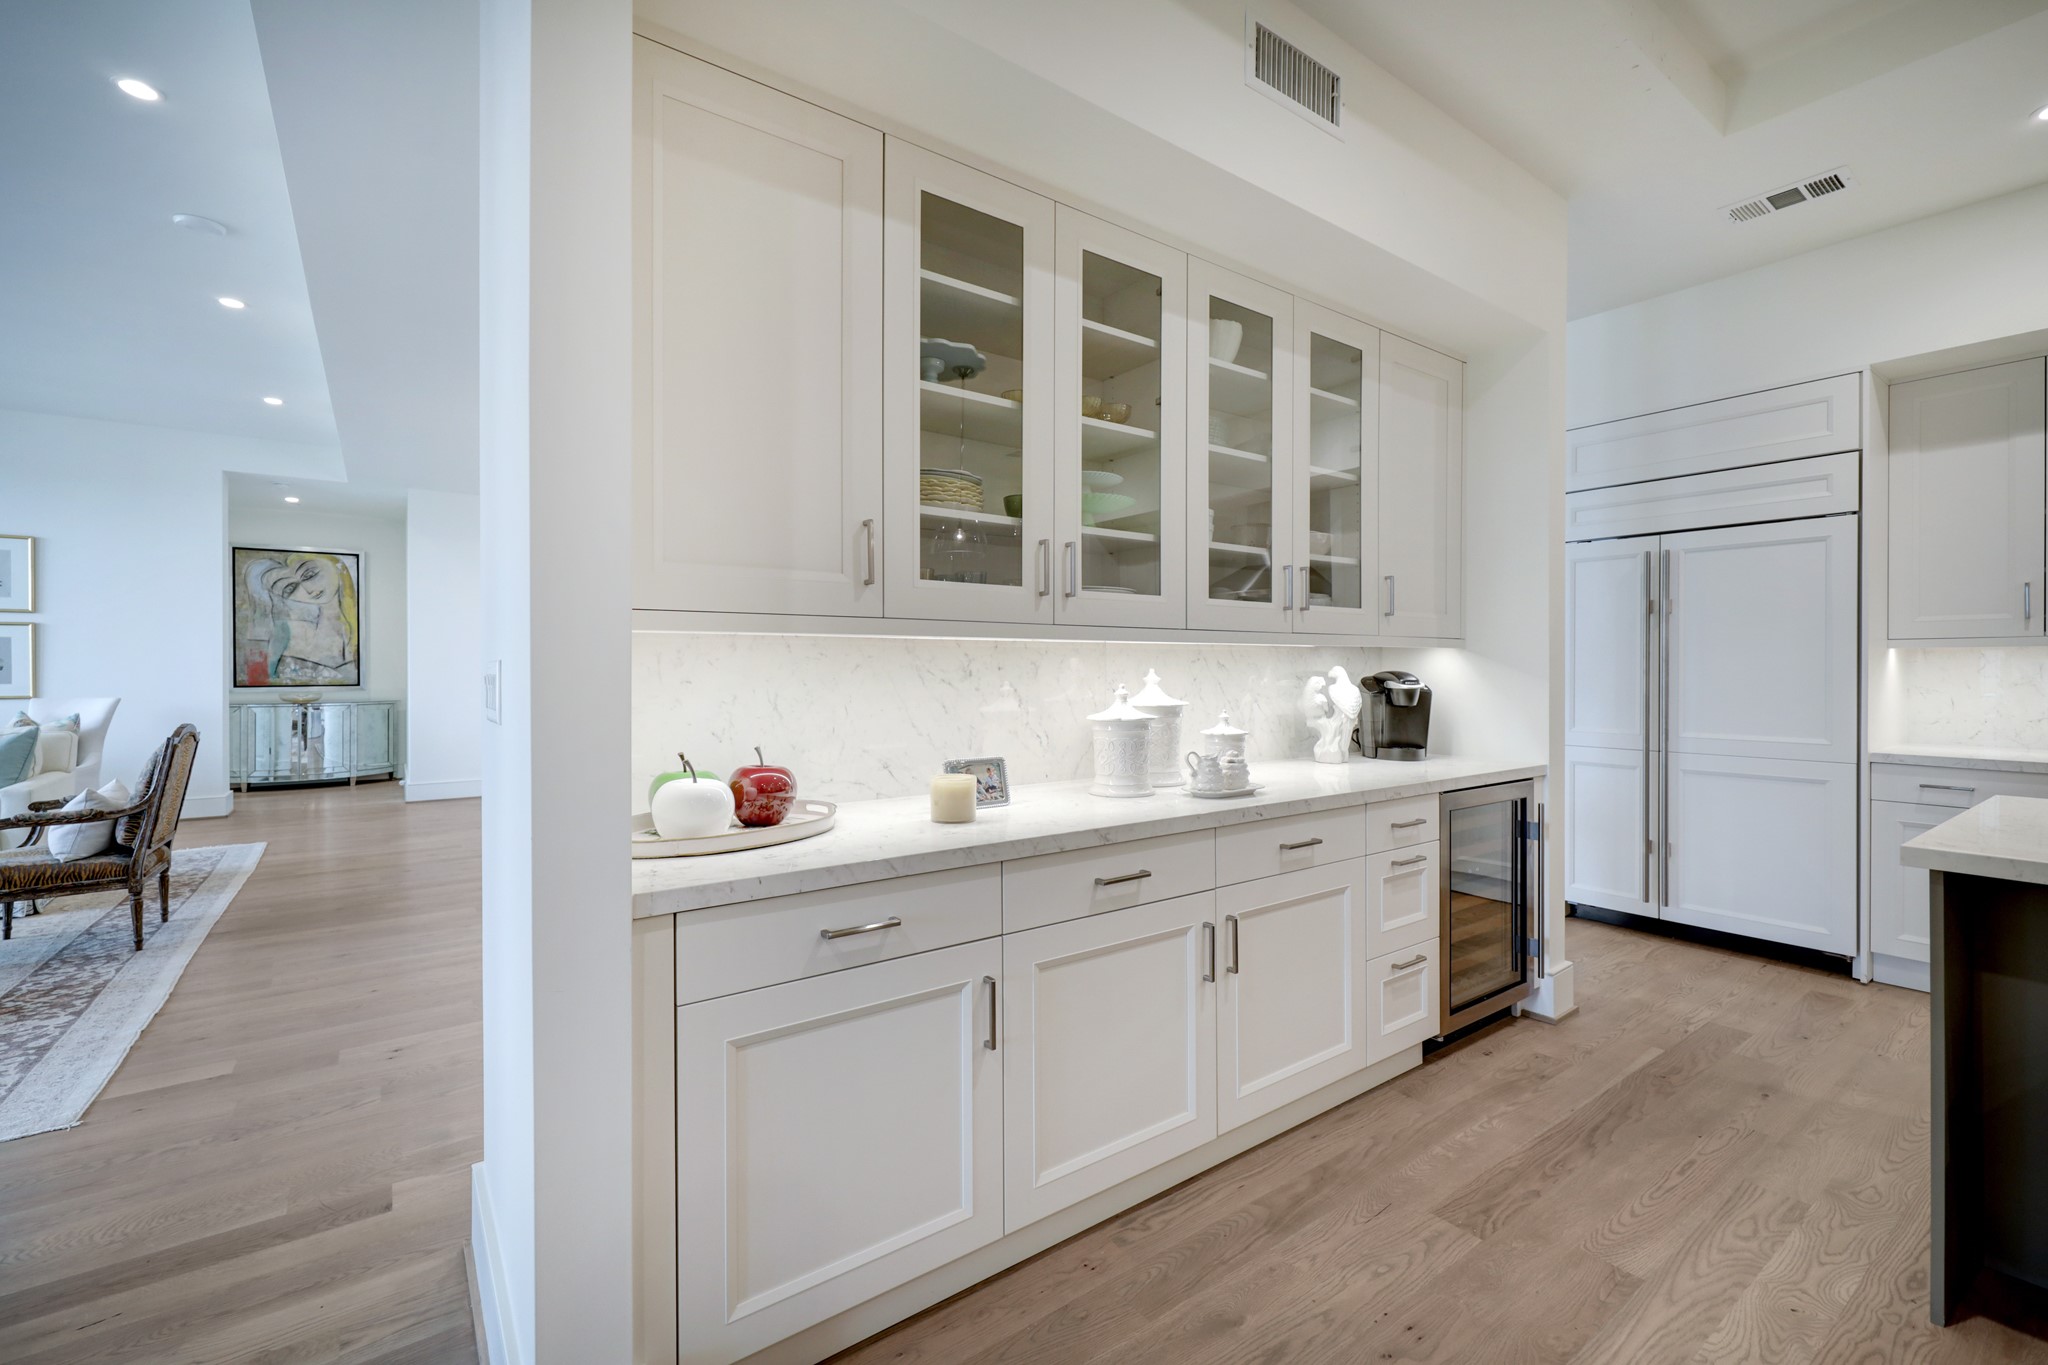 The Kitchen's built-in buffet cabinet features glass front cabinets with under cabinet lighting, quartz counter/backsplash with cabinets and drawers below, Sub-Zero wine cooler.  Perfect for entertaining!